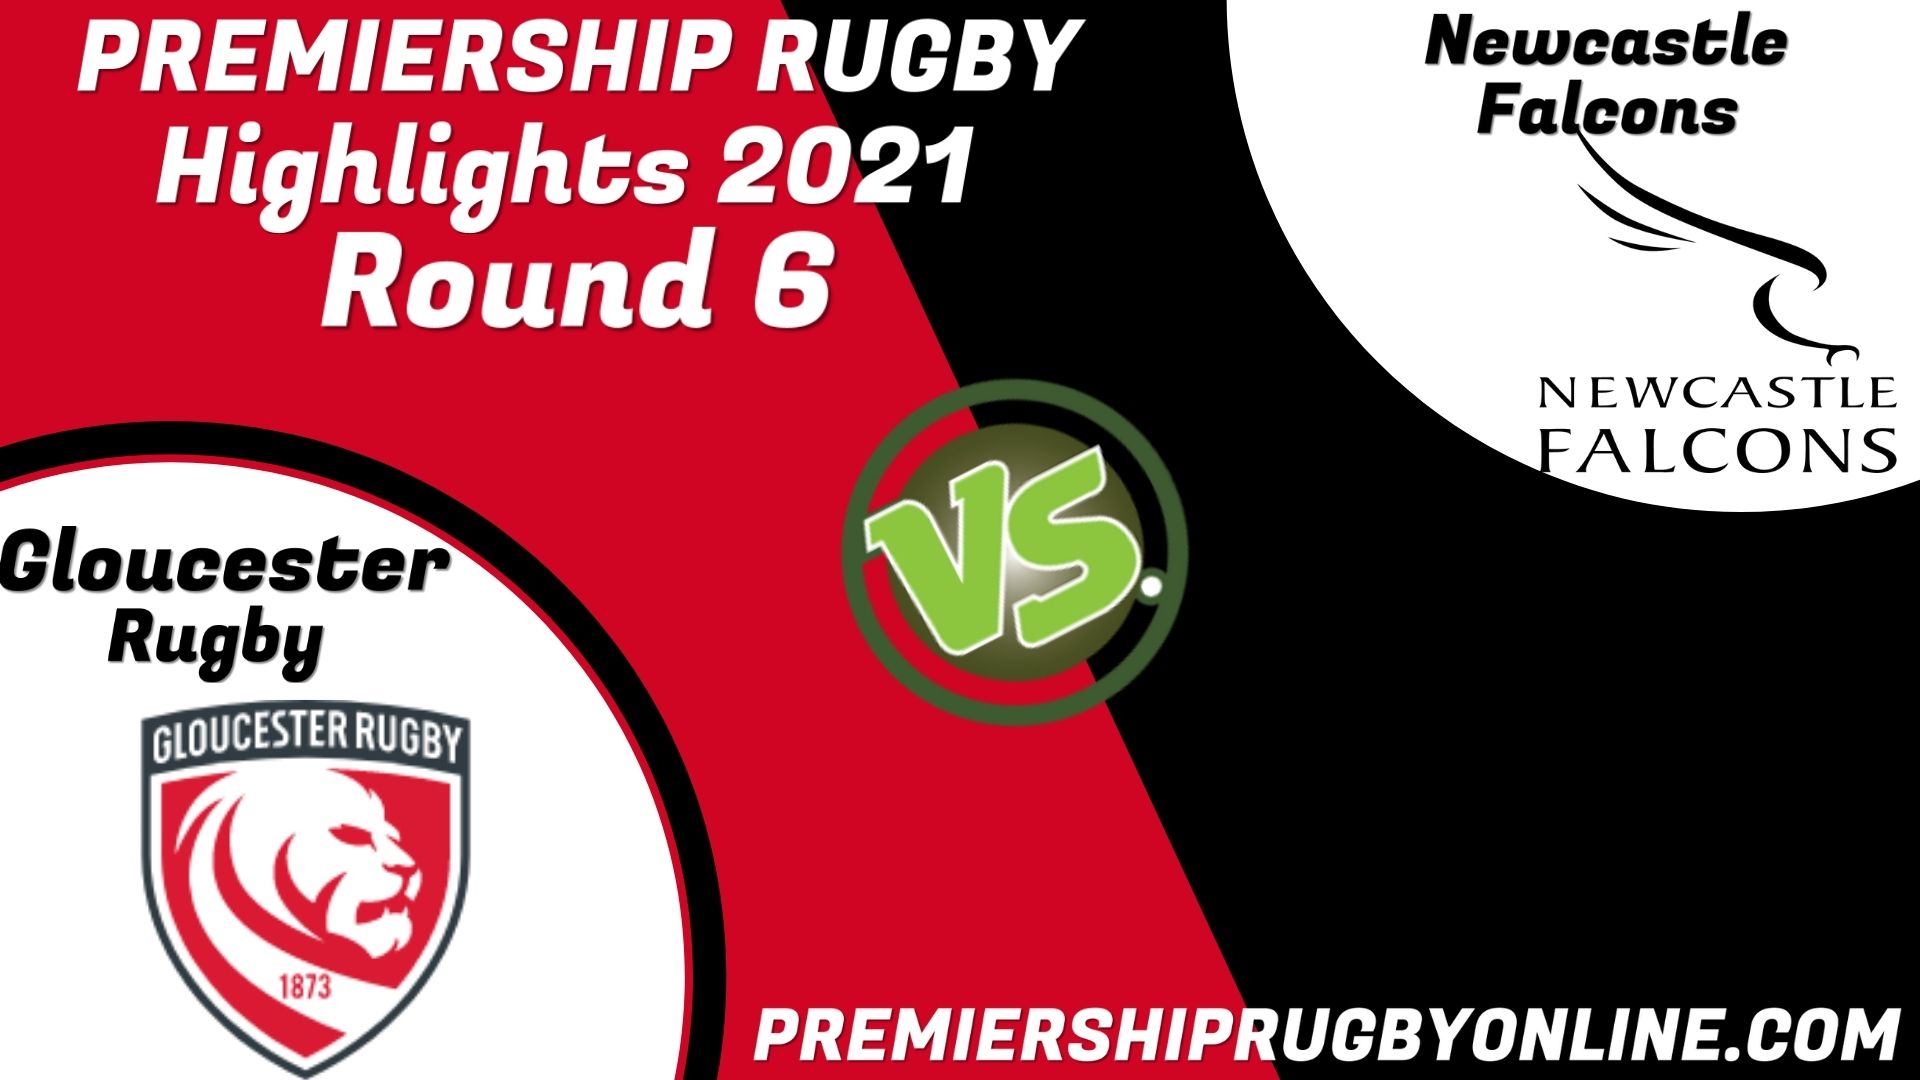 Gloucester Rugby Vs Newcastle Falcons Highlights 2021 RD 6